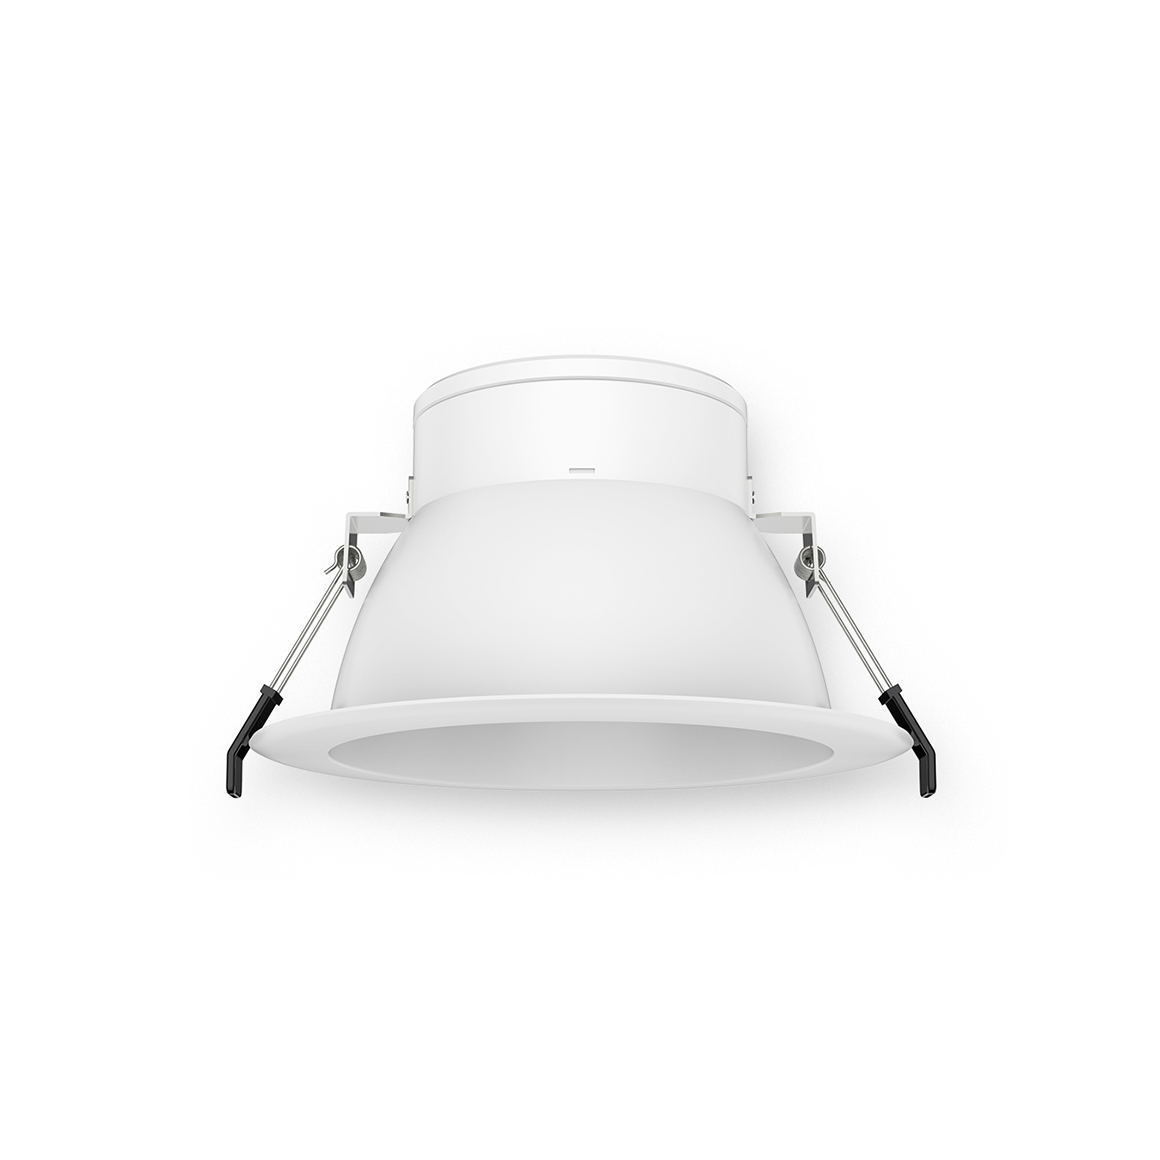 DownLight DS1 3700lm